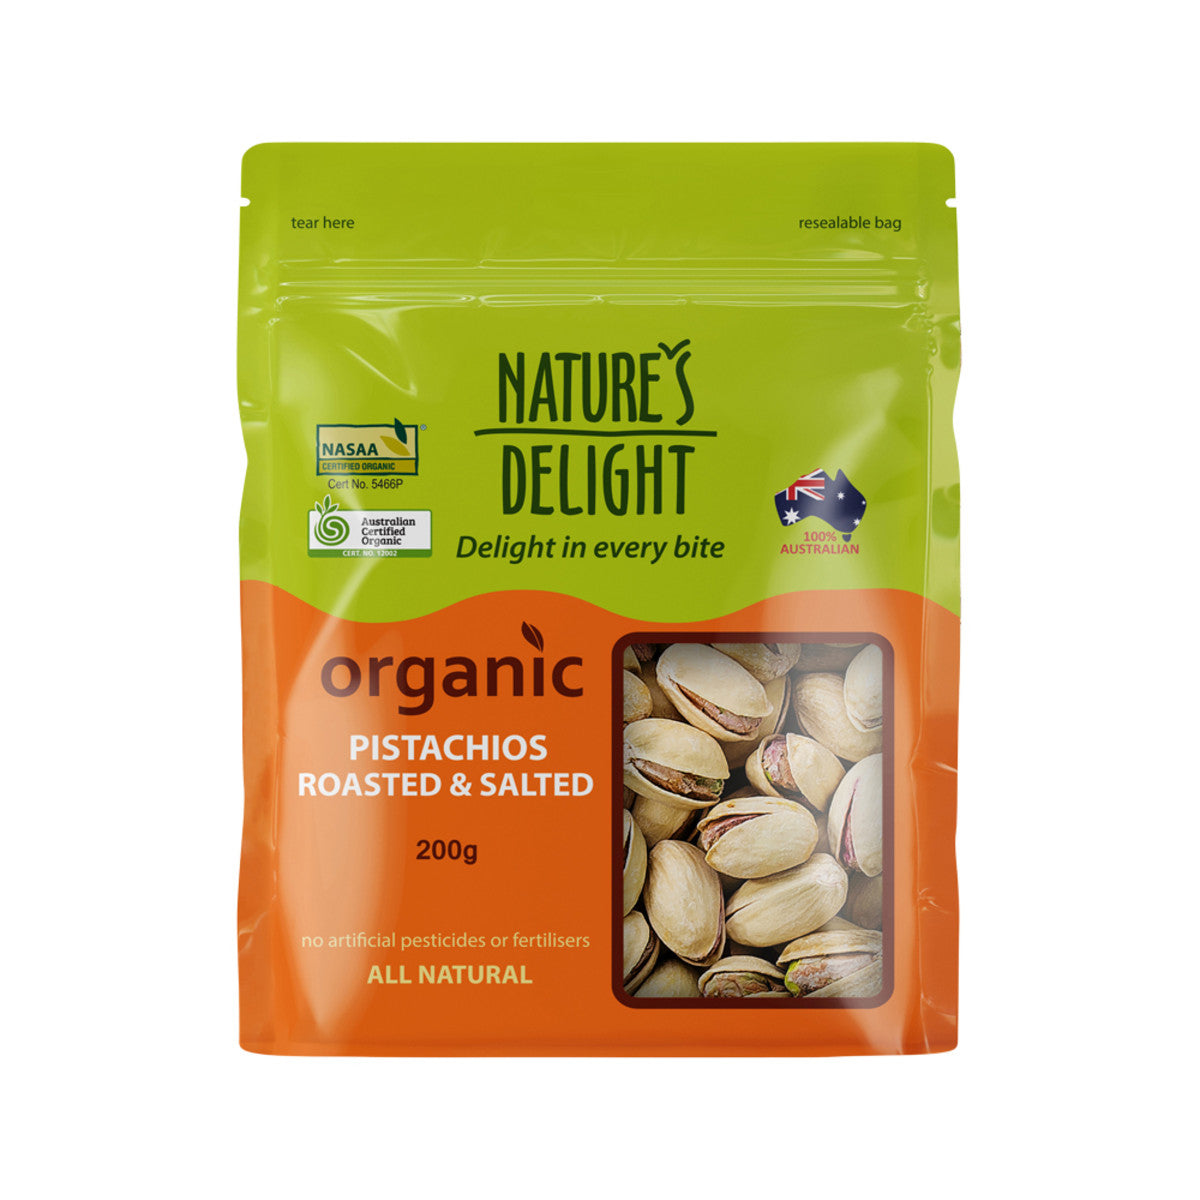 Natures Delight - Organic Pistachios Roasted and Salted